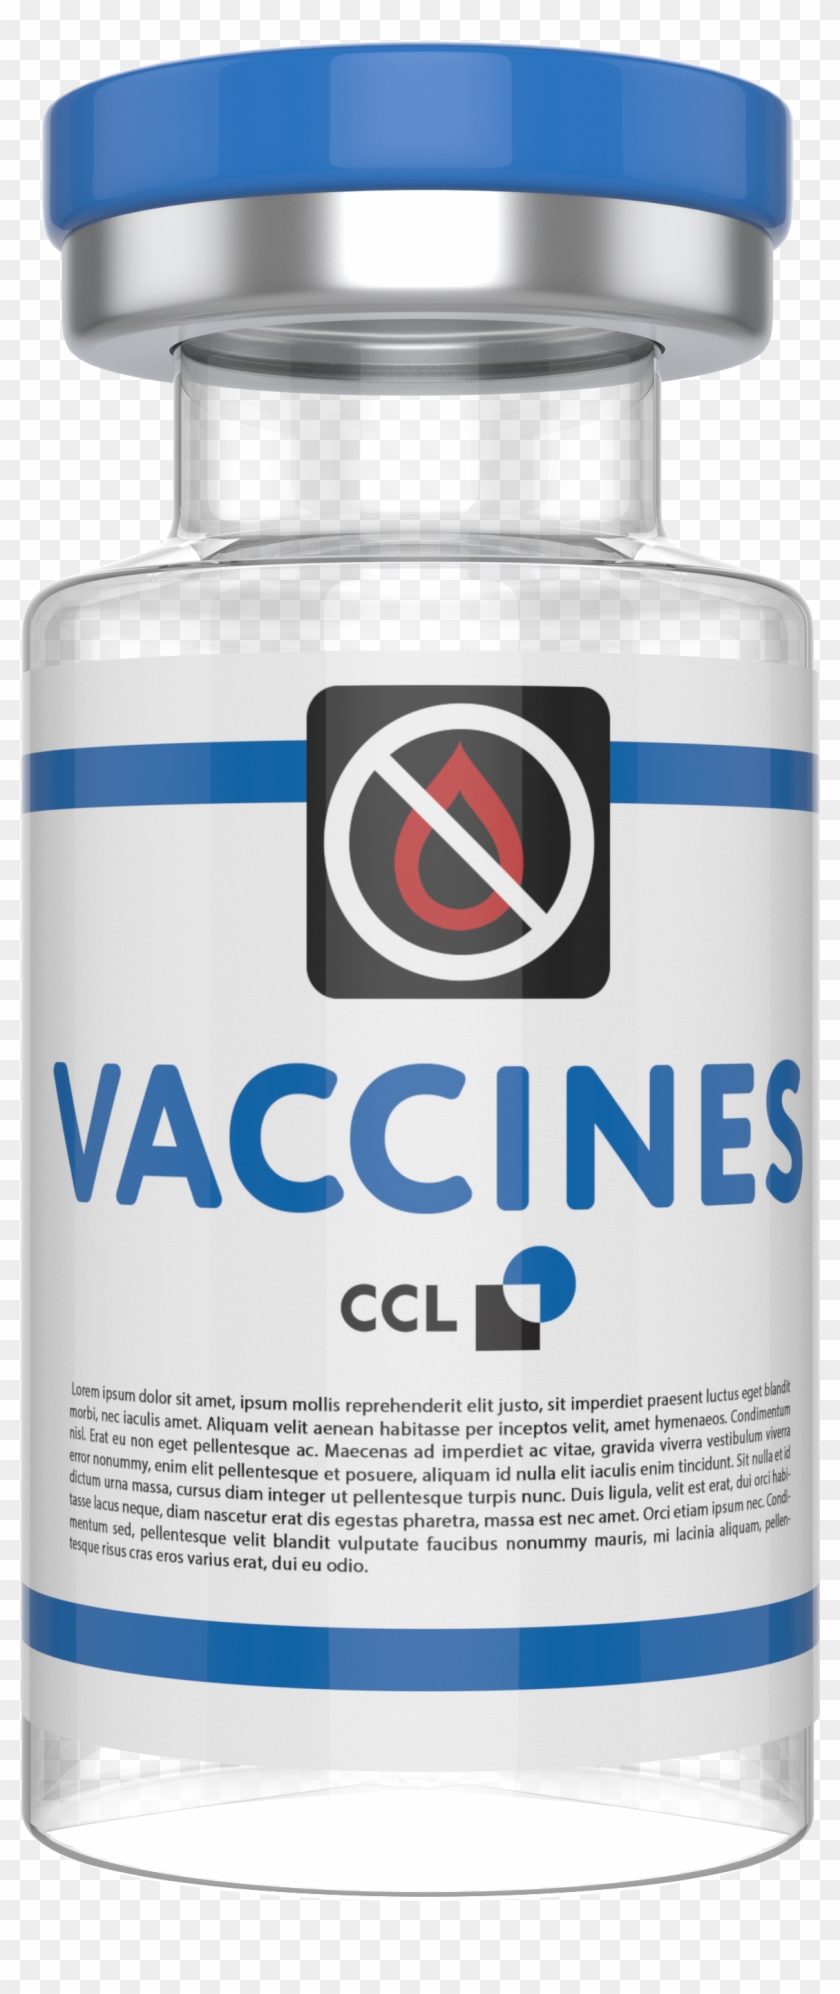 Cold Chain Label On A Vial - Water Bottle Clipart #2663053